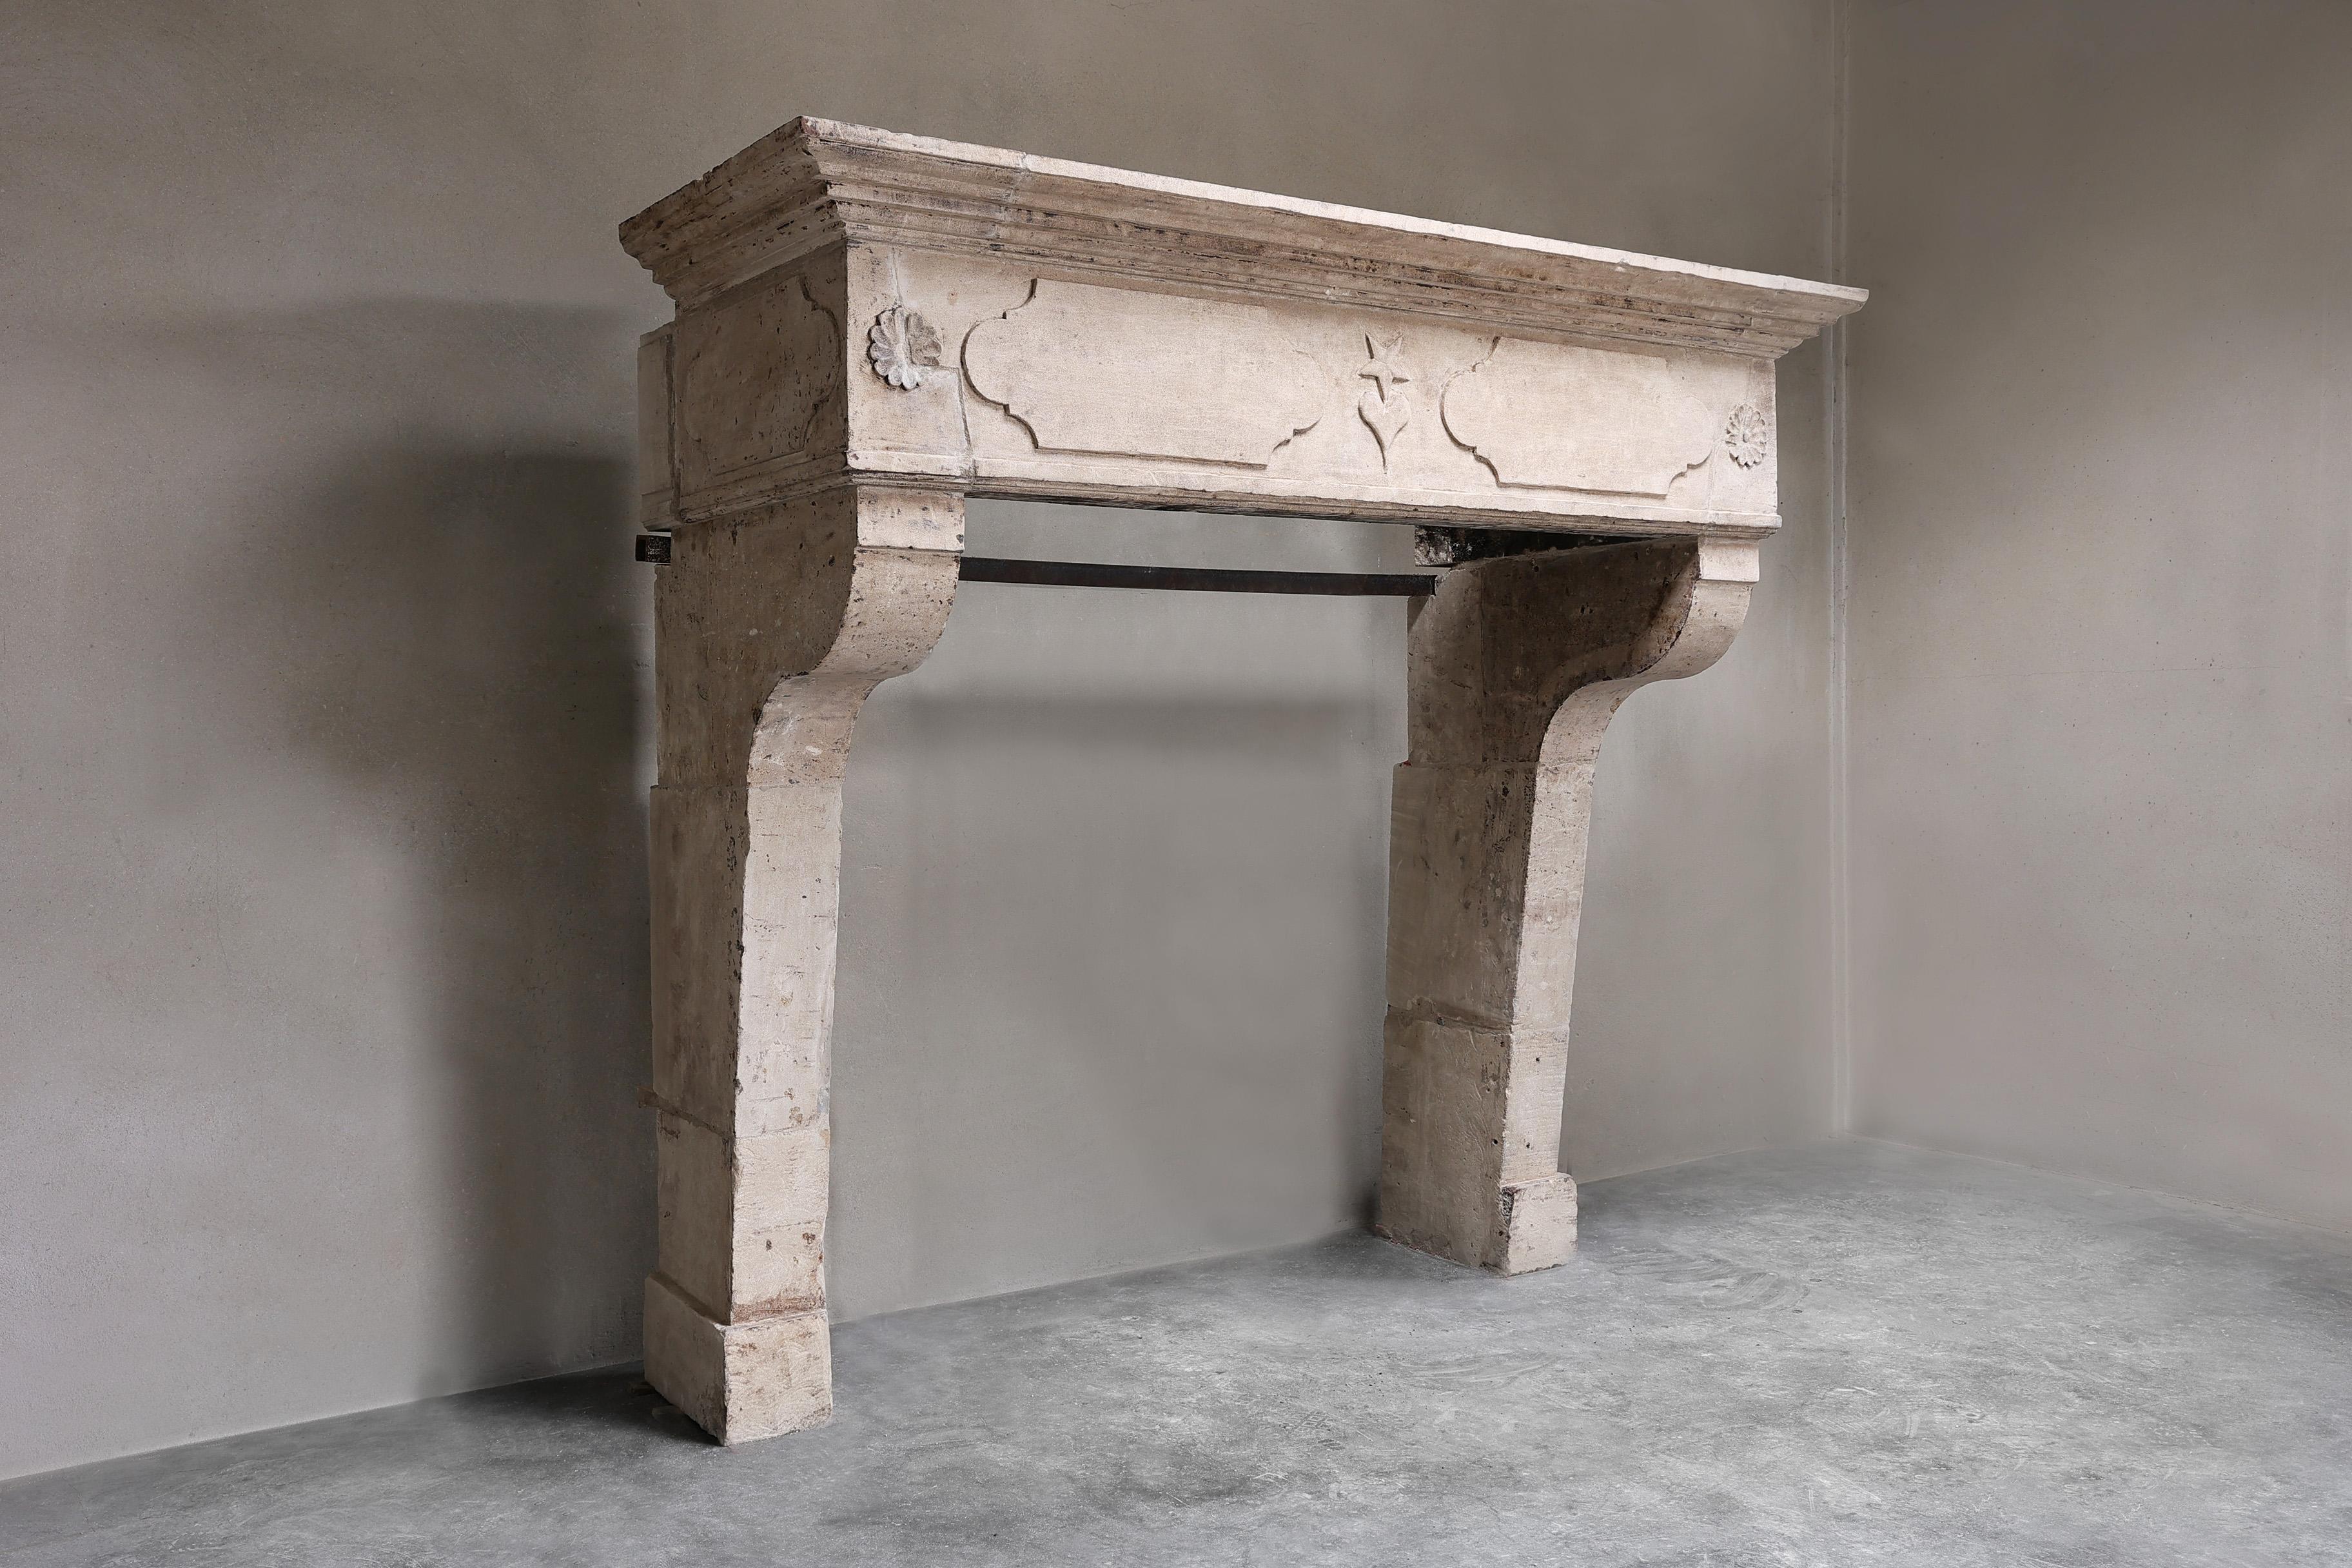 A beautiful robust castle mantelpiece made of French limestone in the style of Louis XIII and from the 19th century. This French mantelpiece has a beautifully decorated front section, but not too busy, with an authentic look!